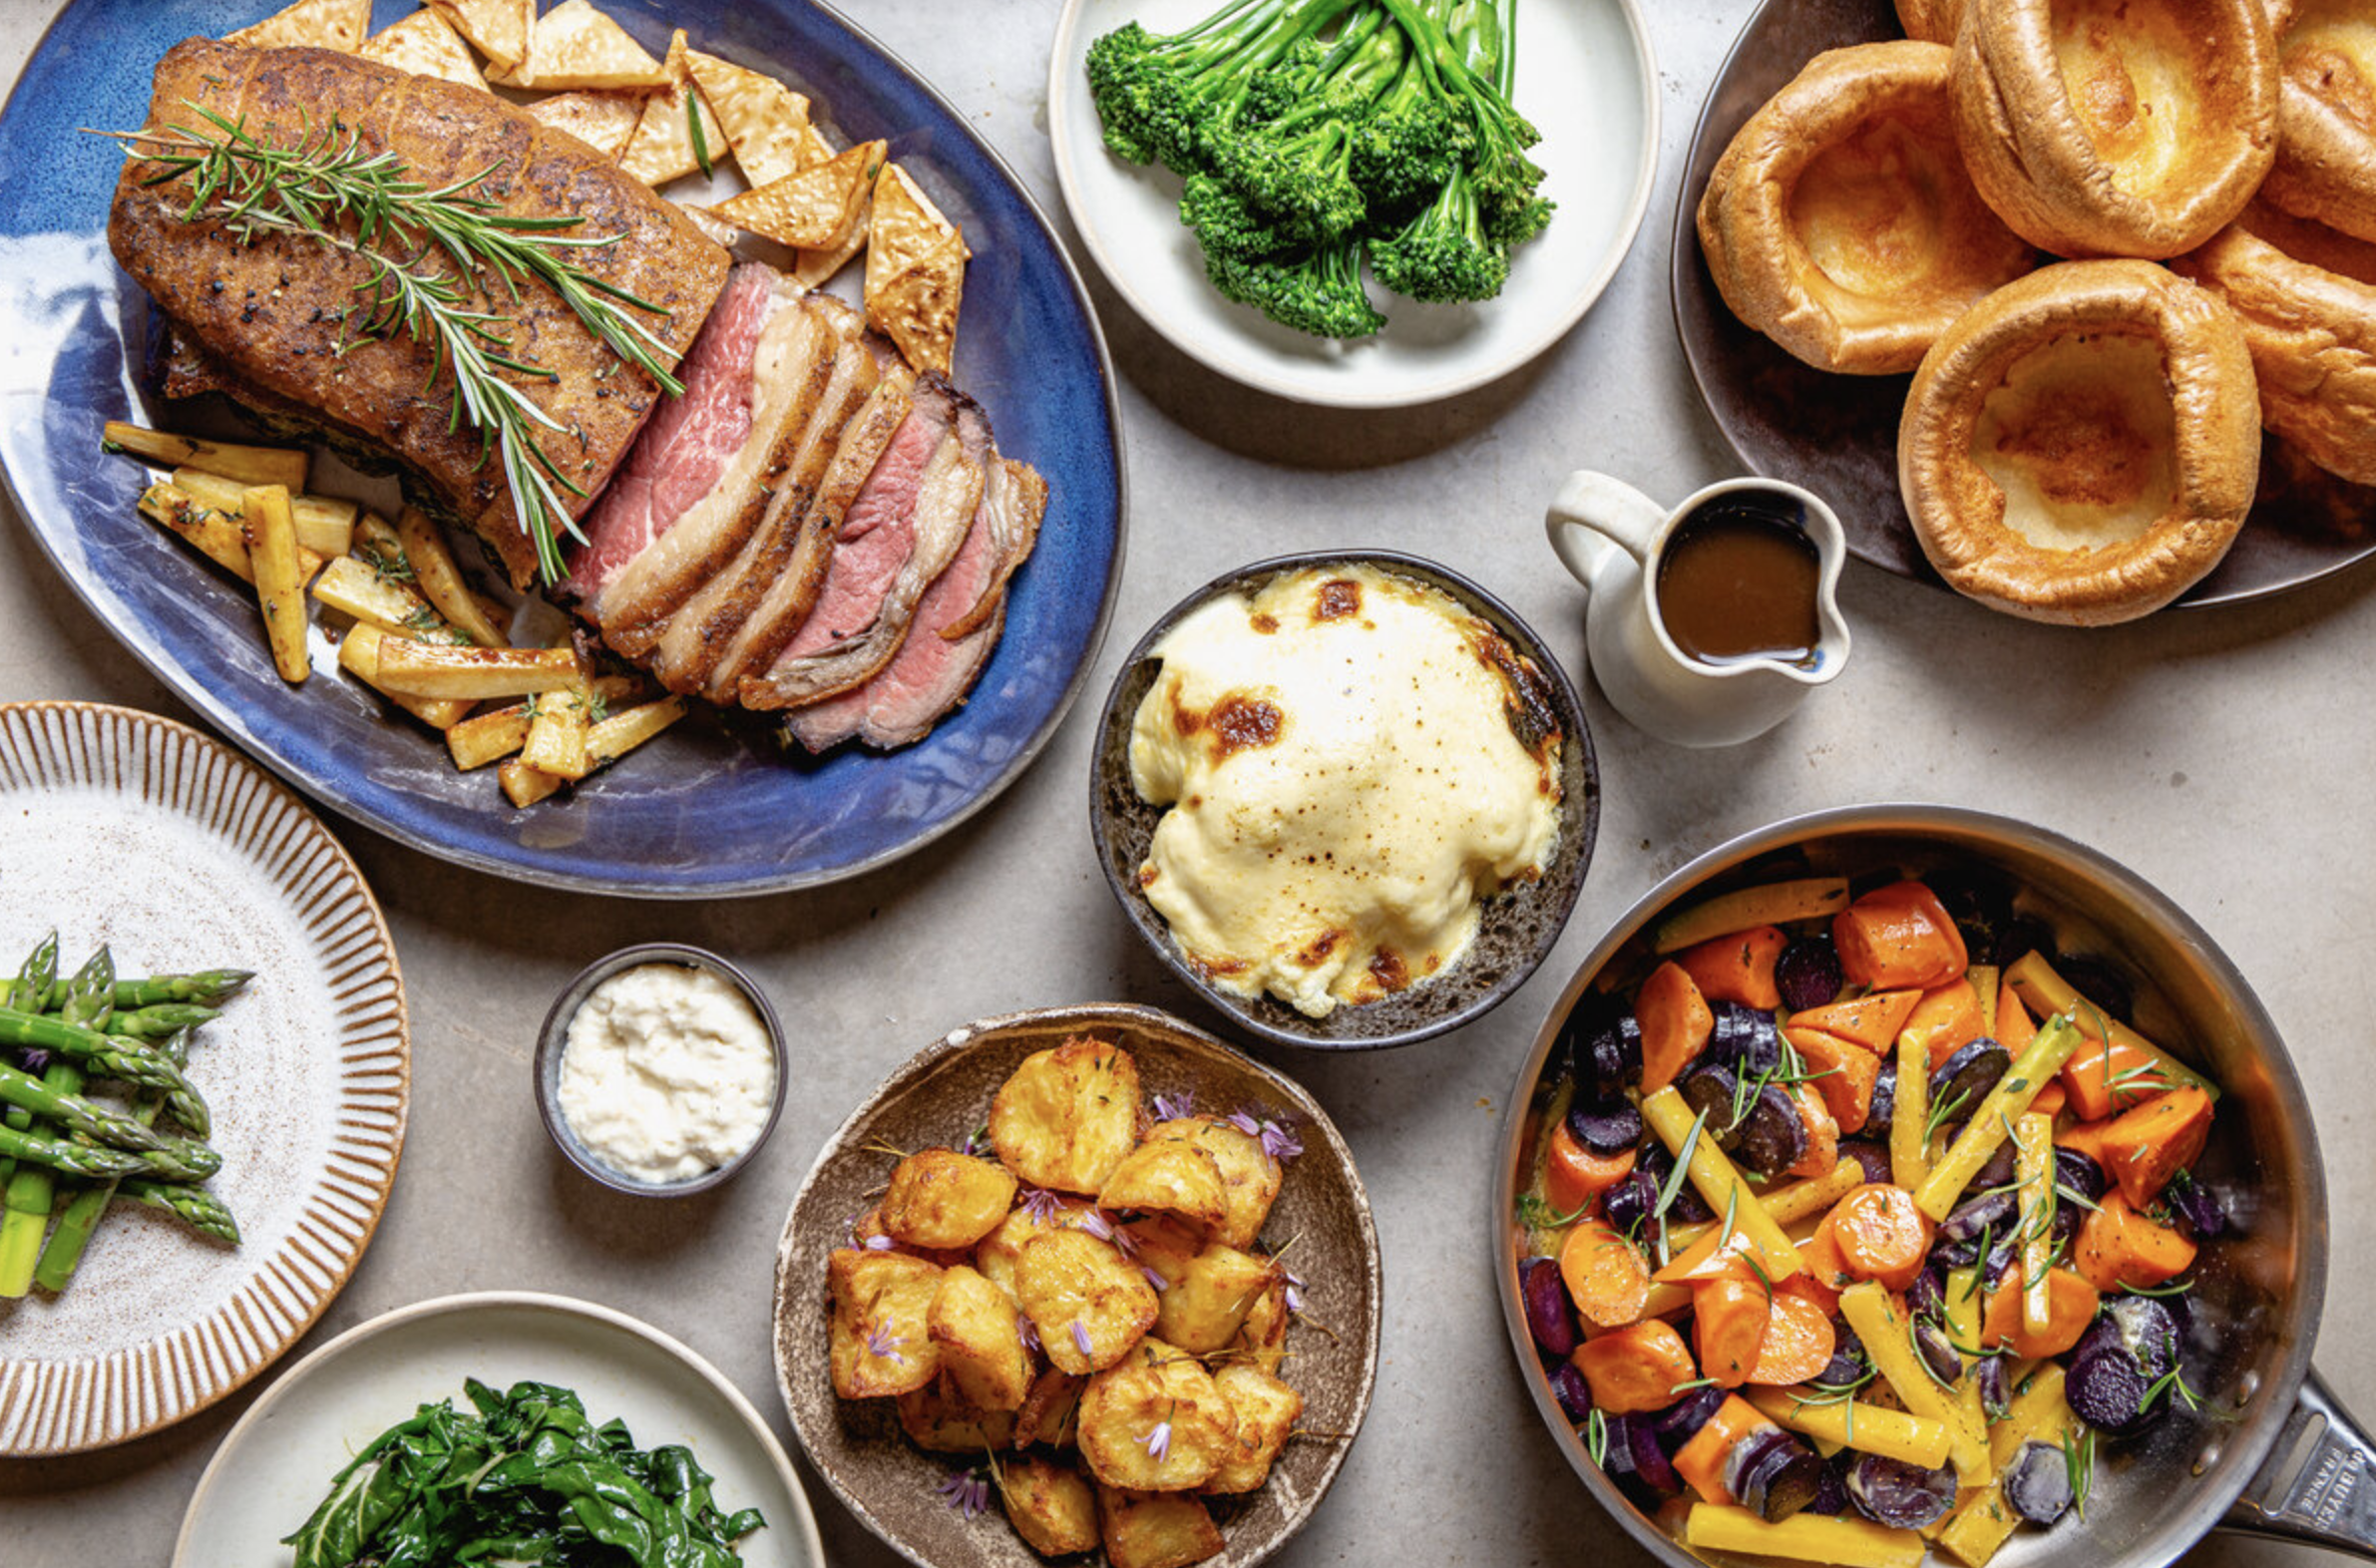 A spread of Sunday Lunch dishes including roast beef, greens, cauliflower cheese and Yorkshire puddings on a white tablecloth